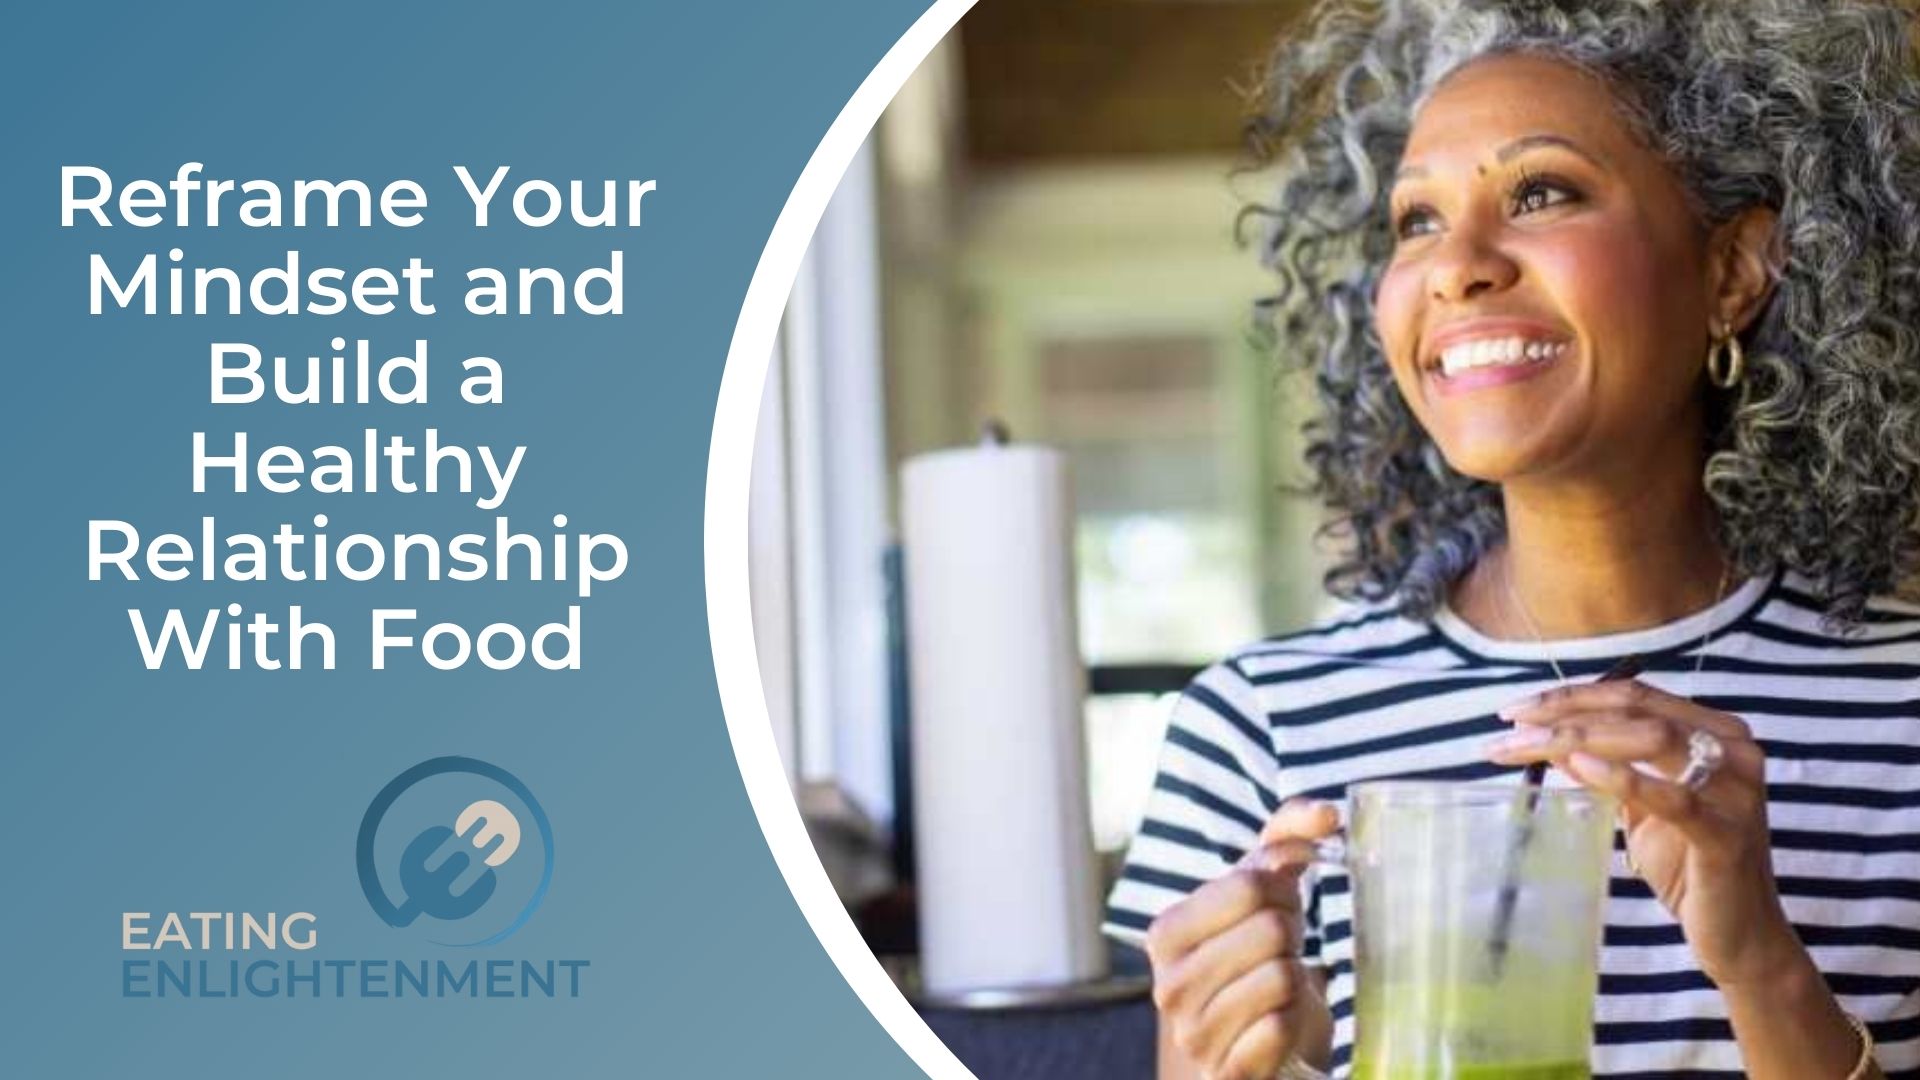 Reframe Your Mindset and Build a Healthy Relationship With Food